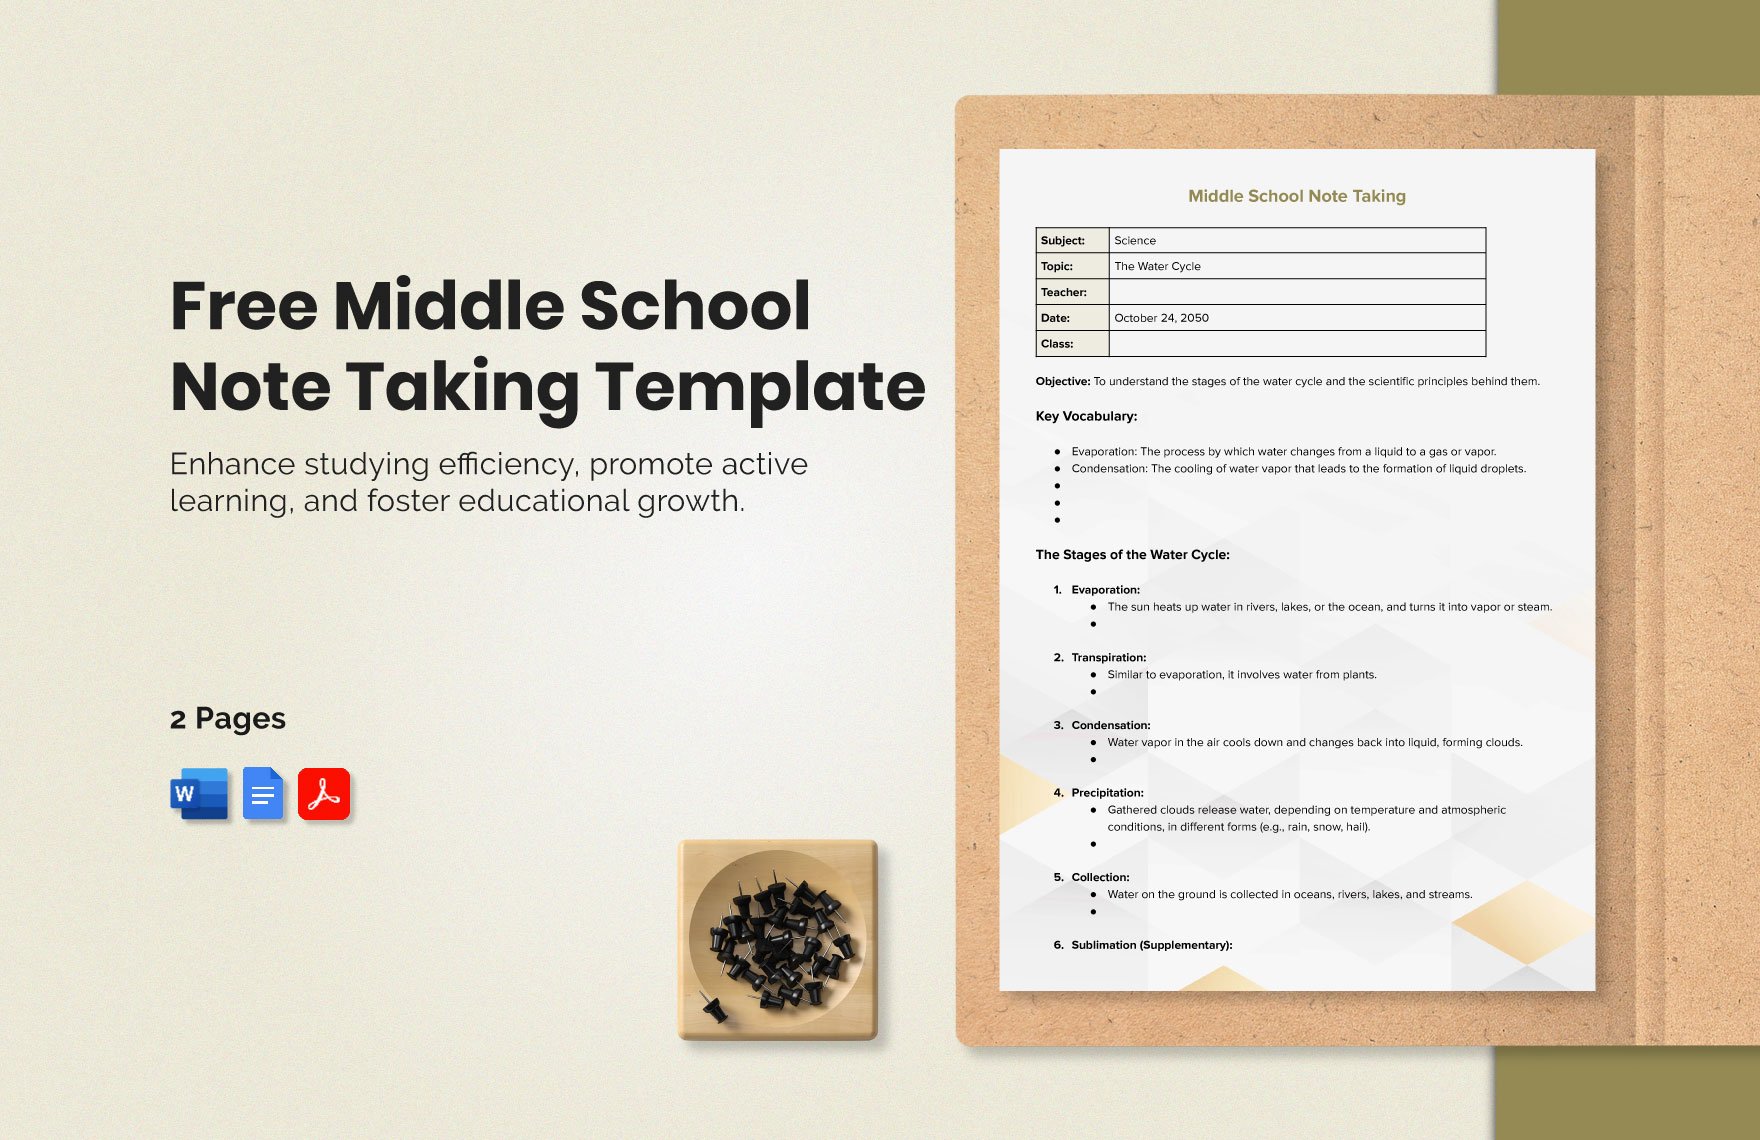 Free Middle School Note Taking Template in Word, Google Docs, PDF